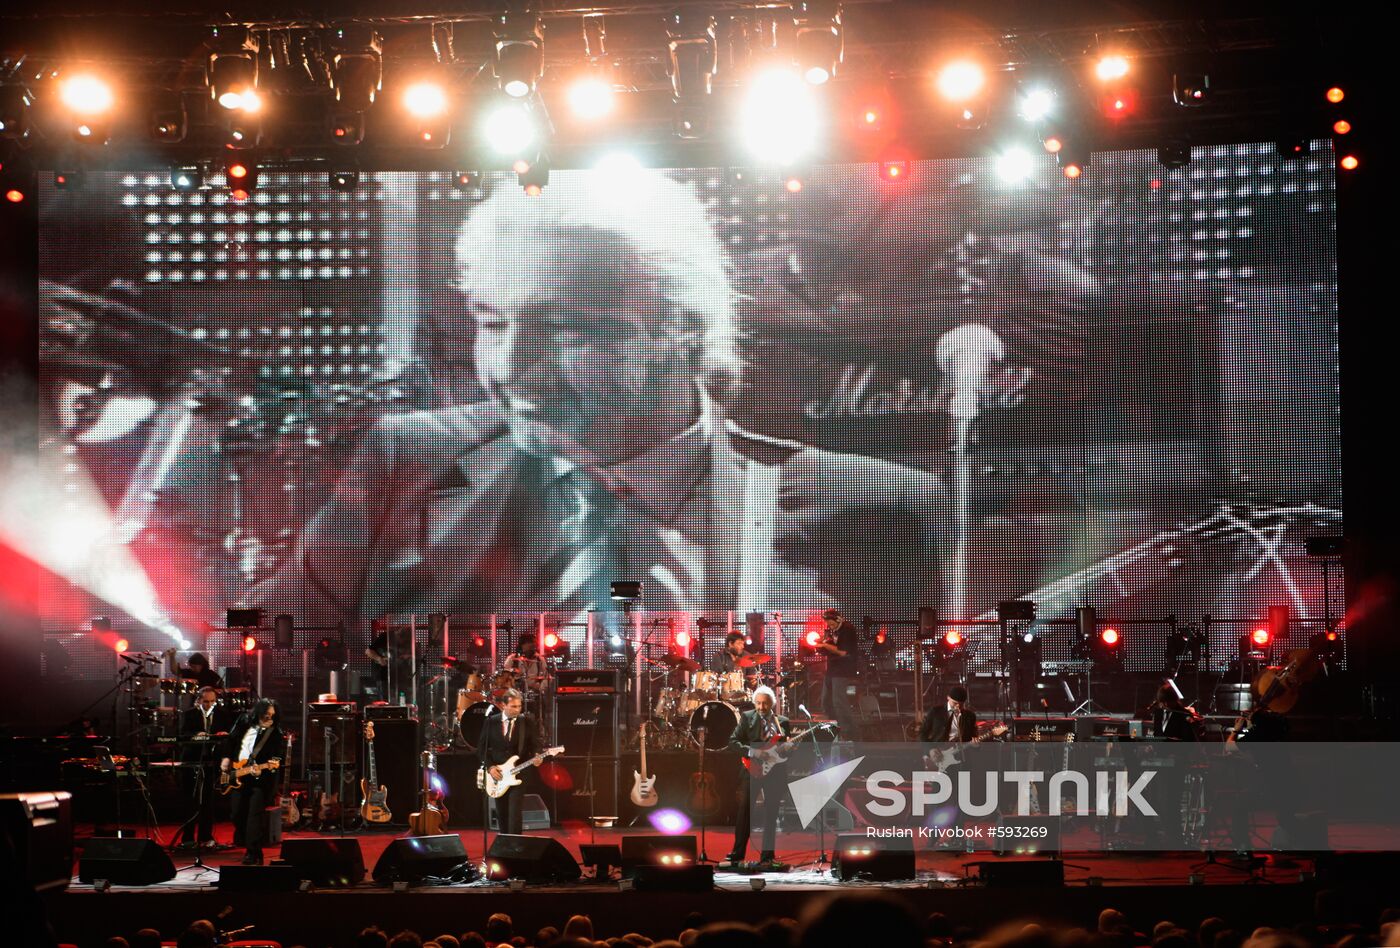 Tsvety band's 40th anniversary concert in Moscow